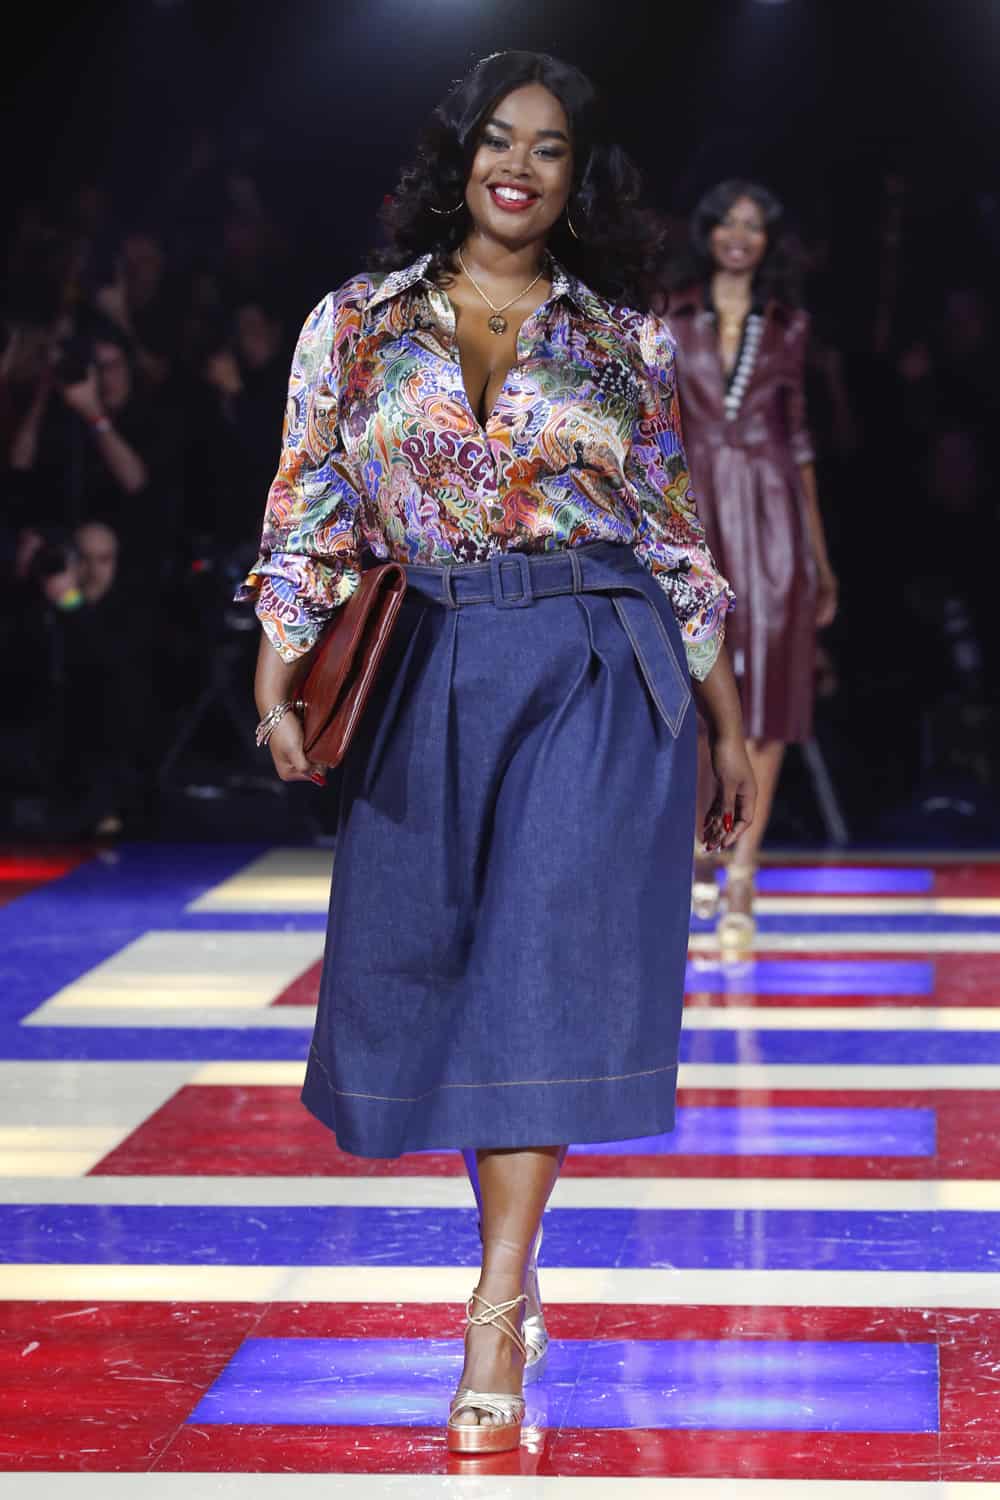 Tommy Hilfiger and Zendaya Brought the Party to Paris Fashion Week